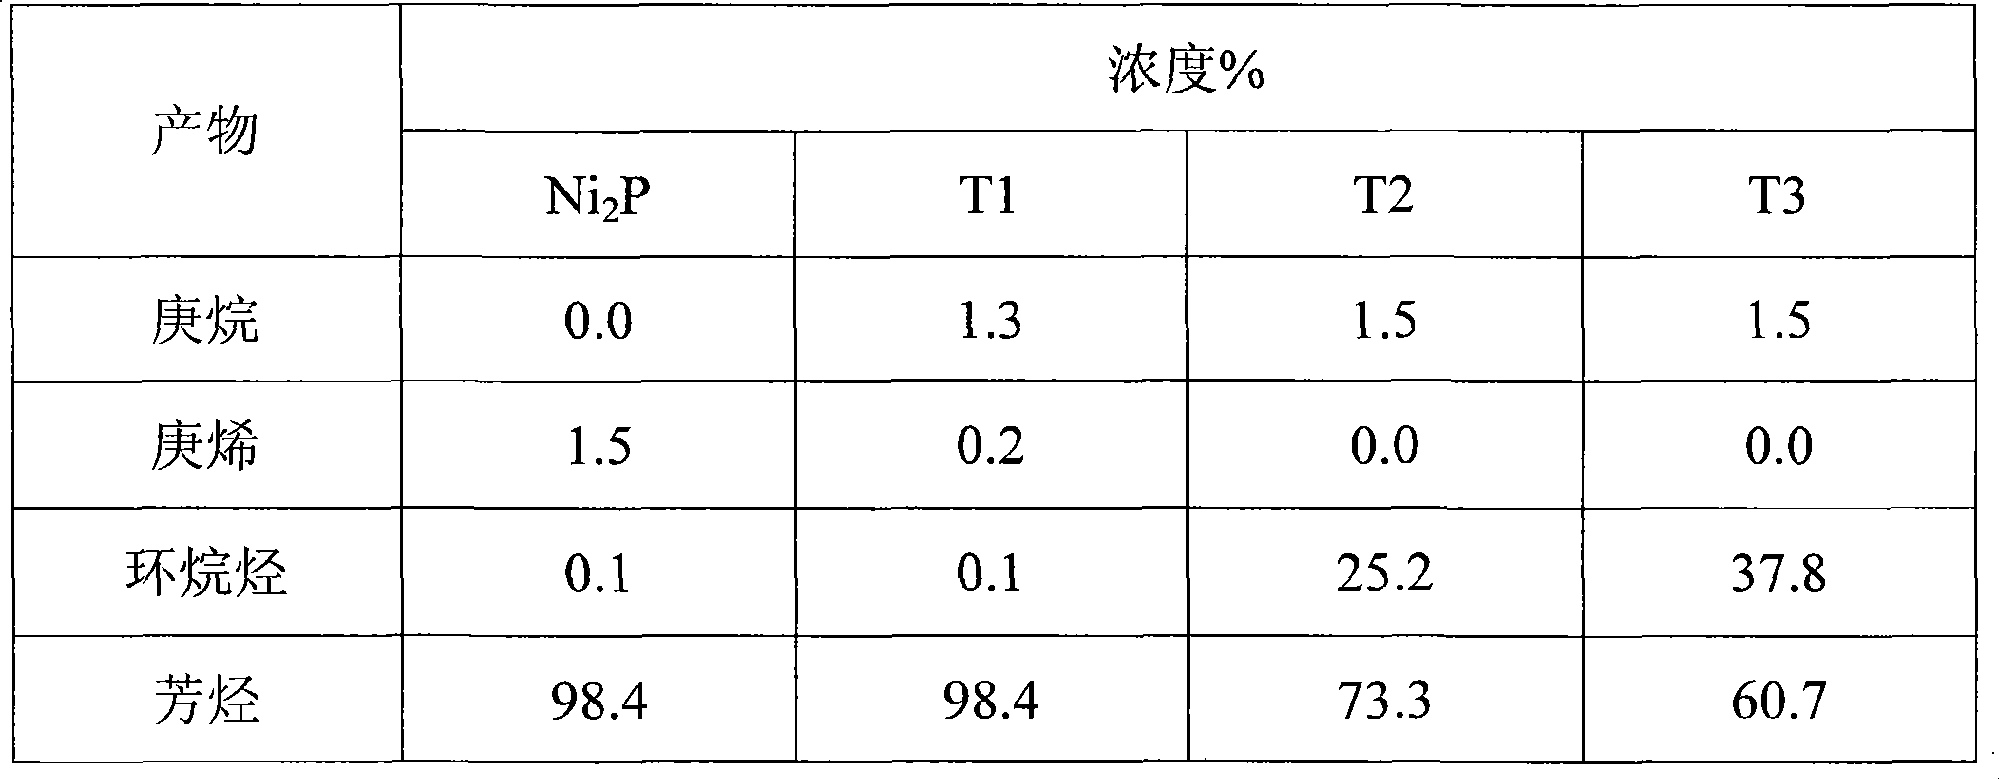 Duplex metal phosphide catalyst for selective hydrogenation and olefin hydrocarbon removal as well as preparation method thereof